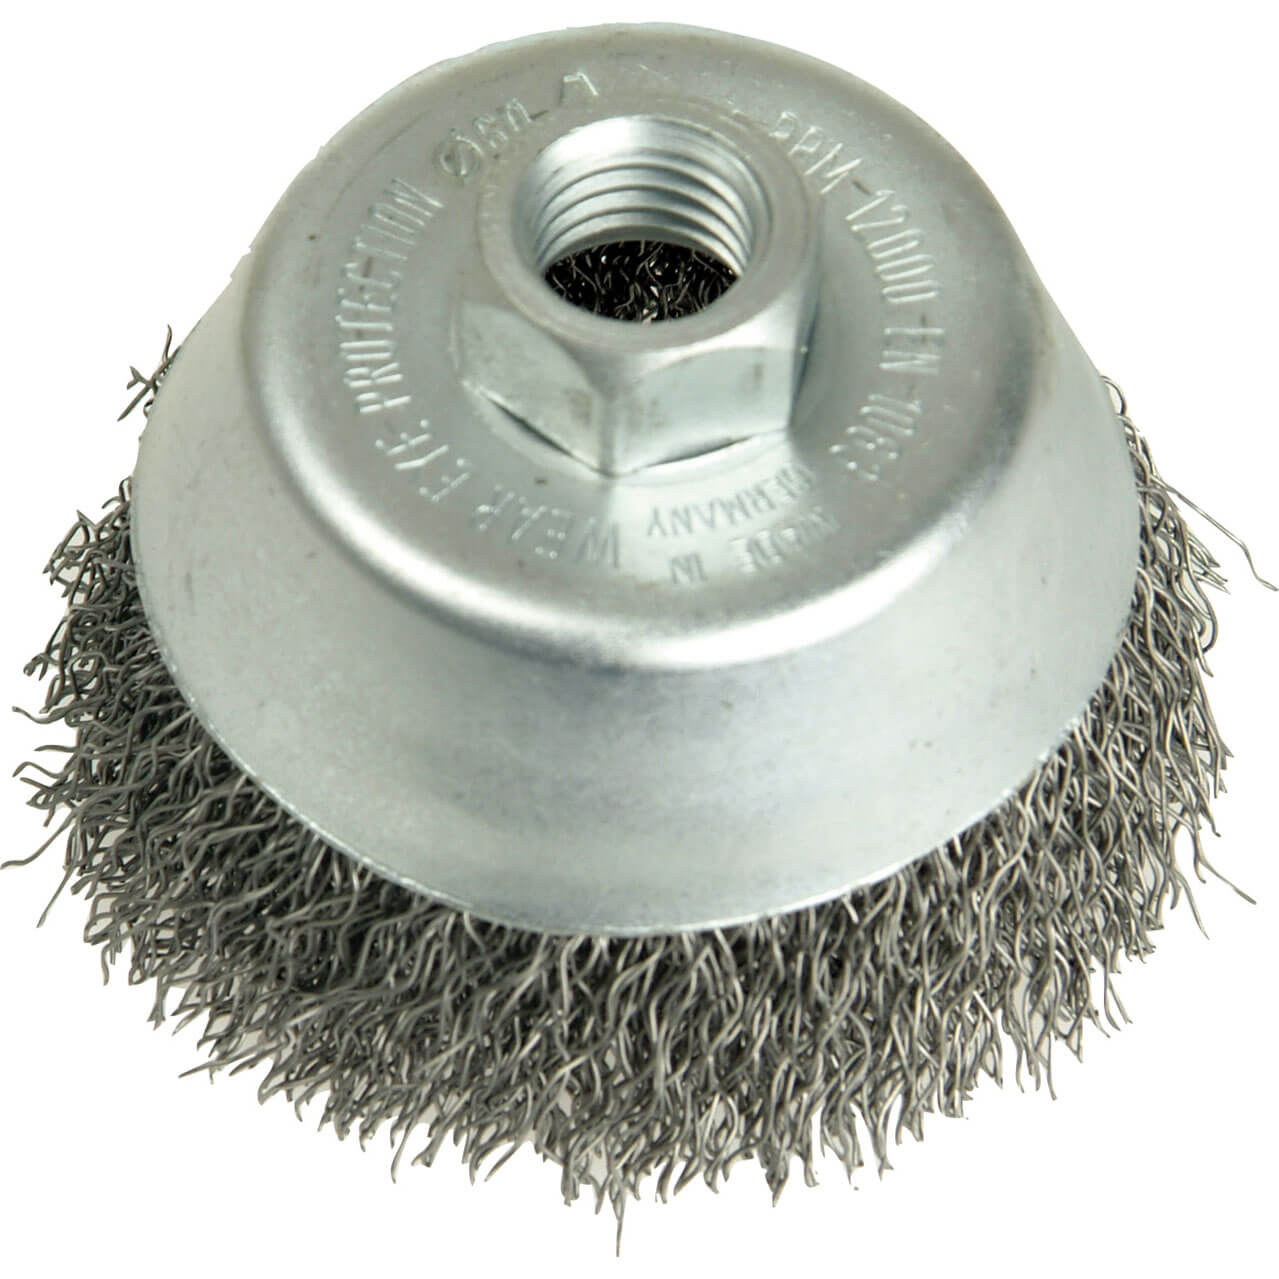 Photos - Power Tool Accessory Lessmann Crimped Steel Wire Cup Brush 80mm M14 x 2.0 Thread LES424177 